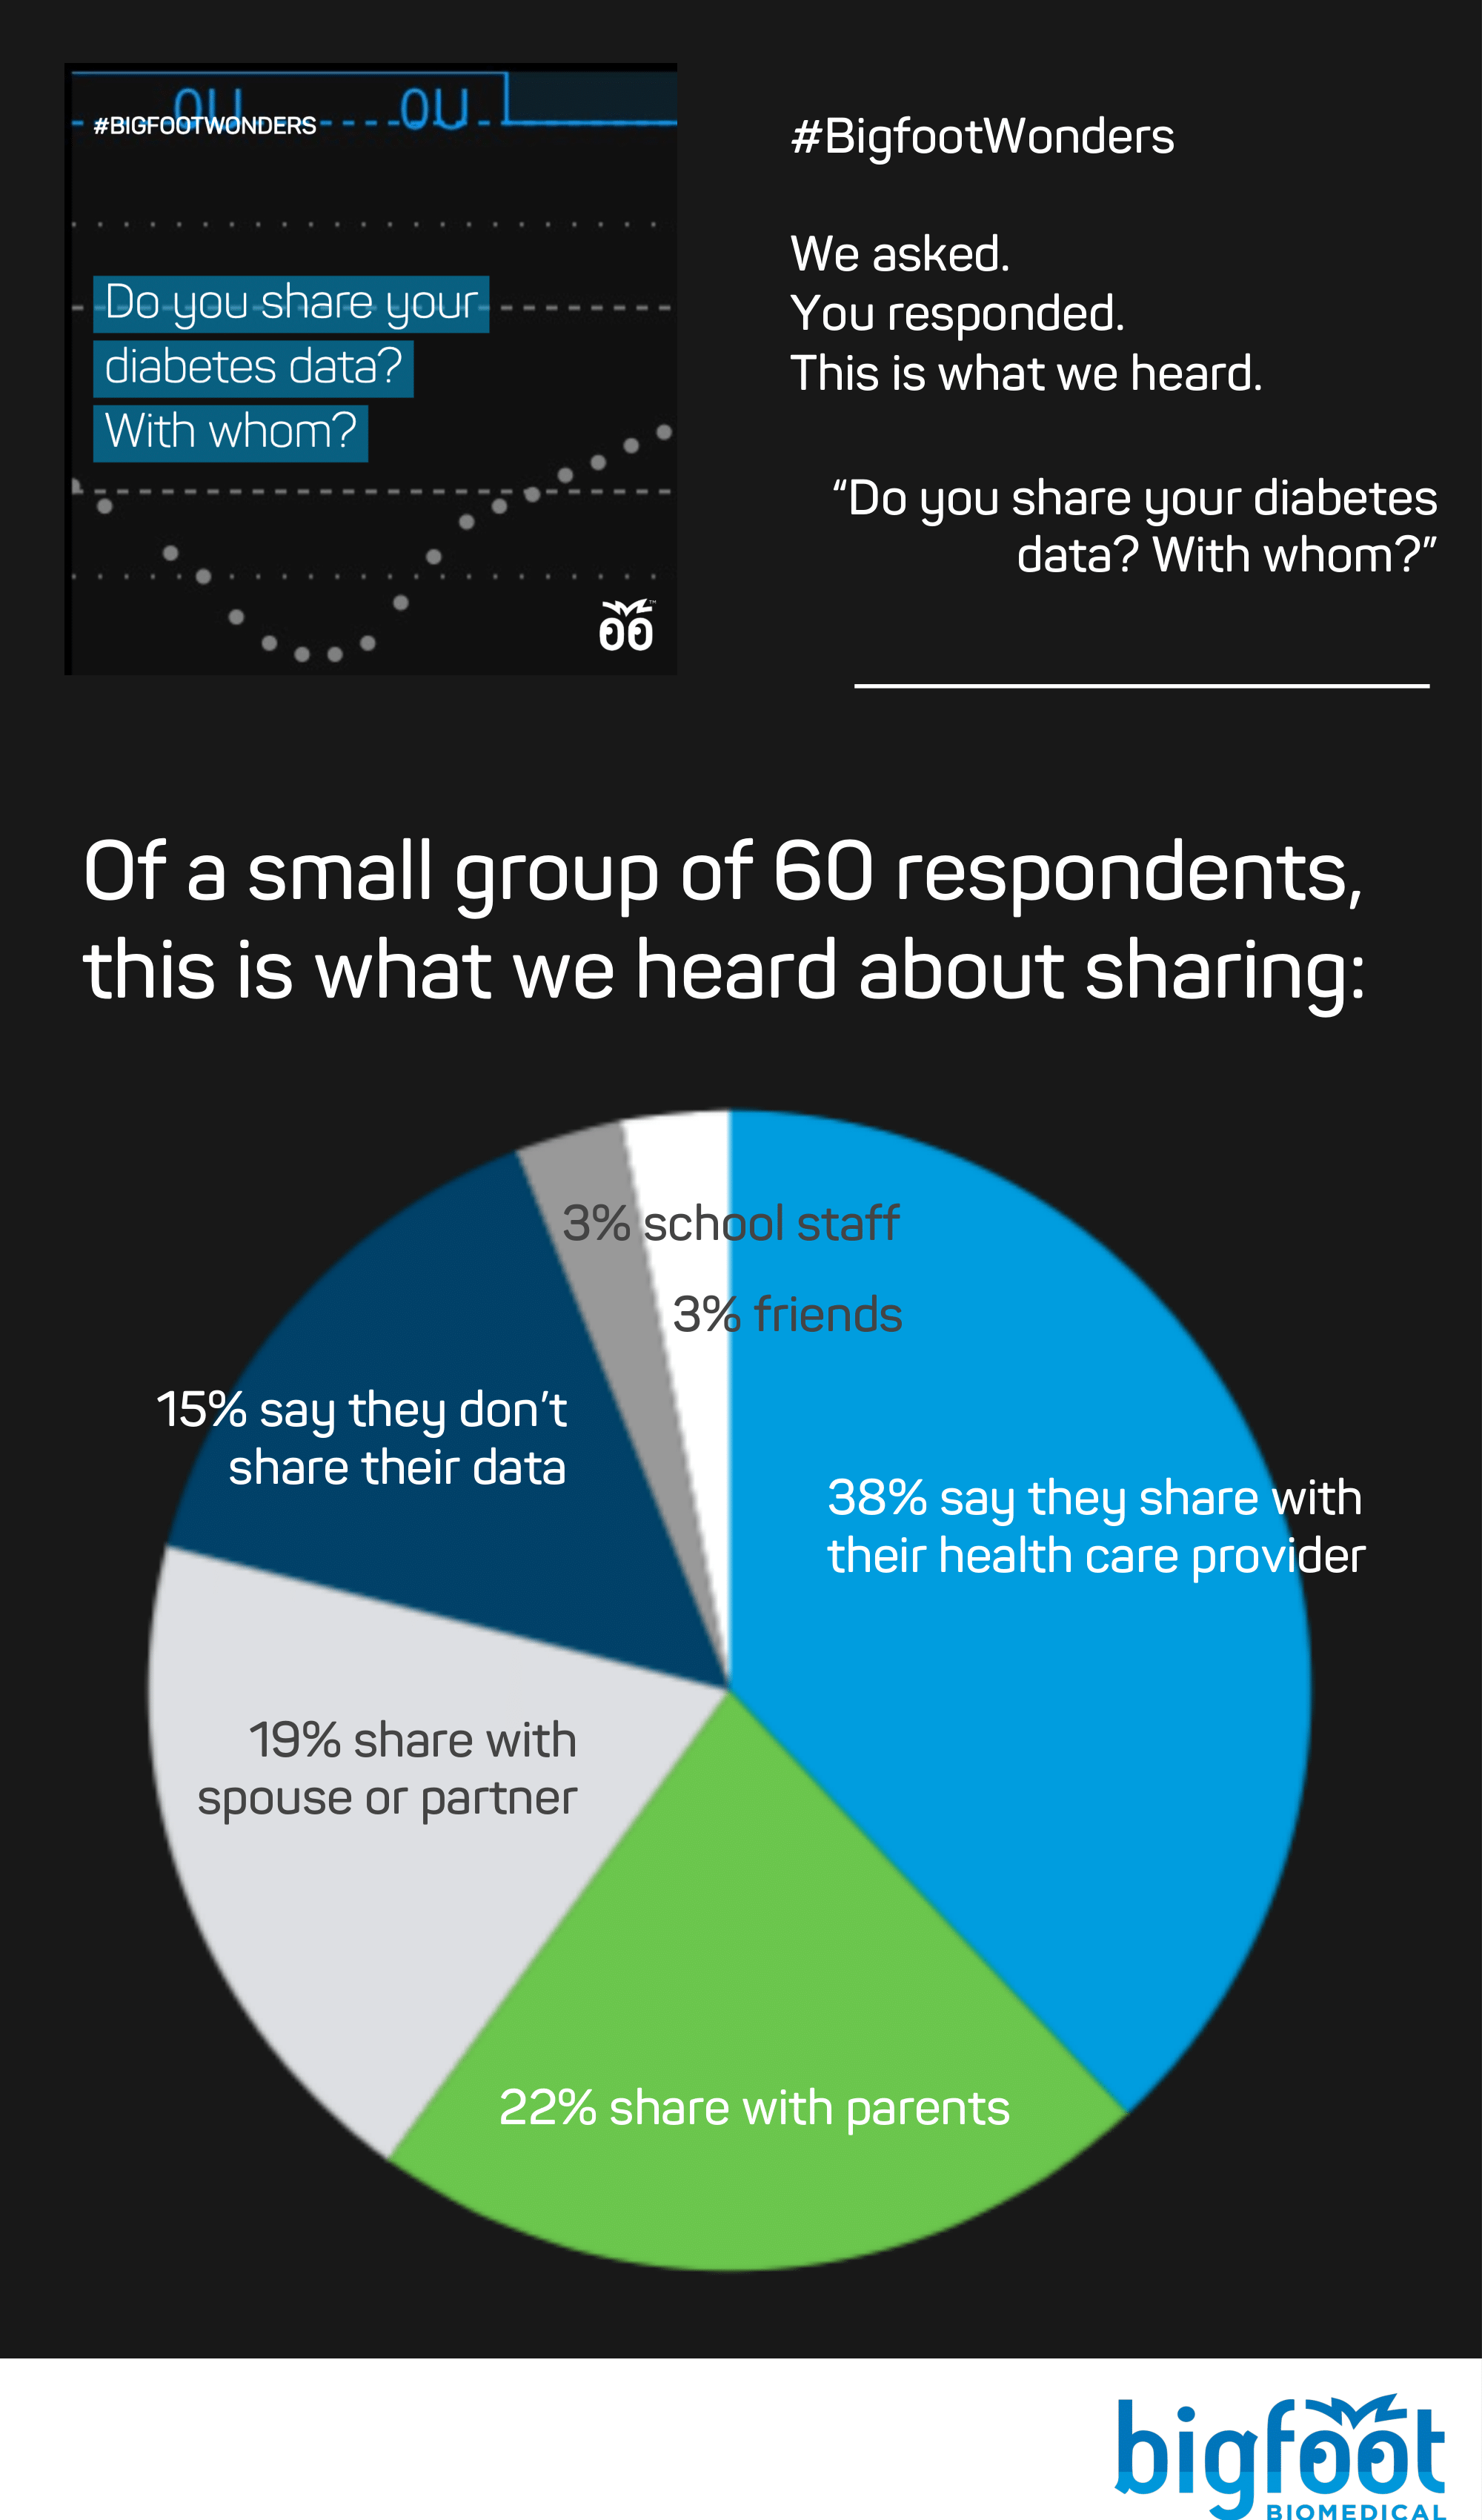 Do you share your diabetes data? With whom? 60 people responded to this query, with 38% saying with health care provider, 22% between parent and child, 19% with spouse or partner, 15% say they don't share diabetes data at all, and 3% each saying with a friend or with school staff.